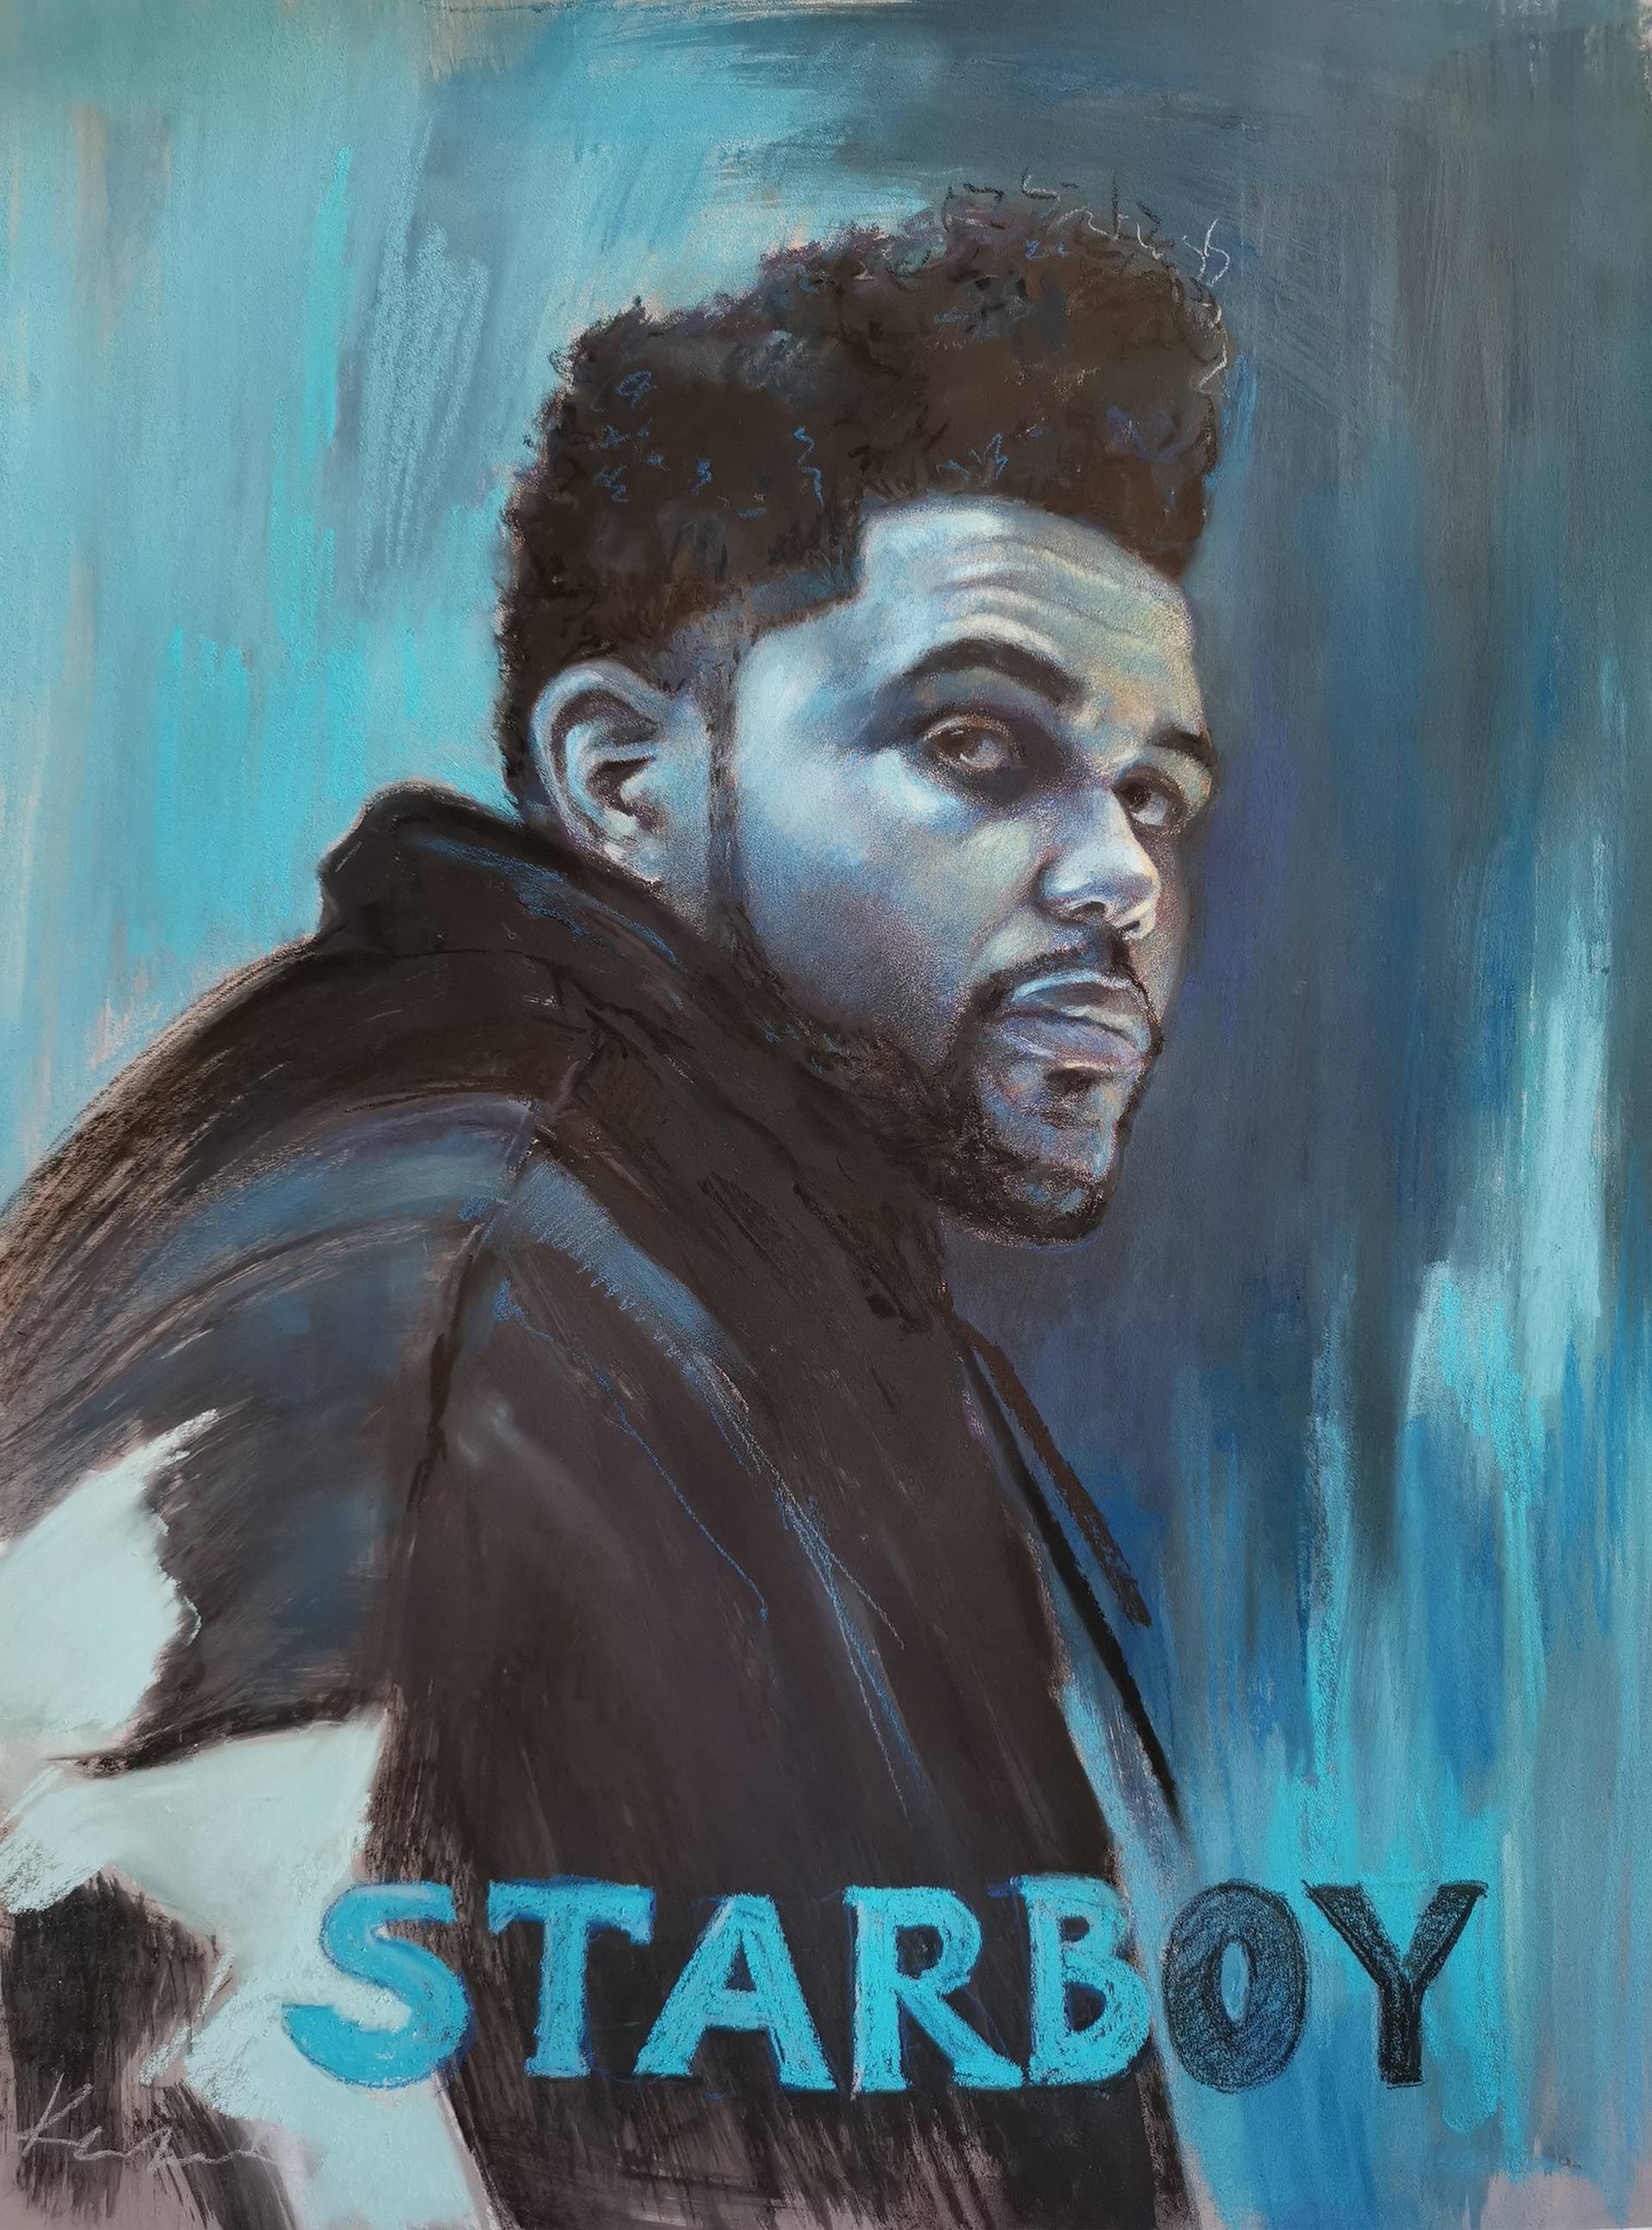 The Weeknd Acrylic Blocks for Sale